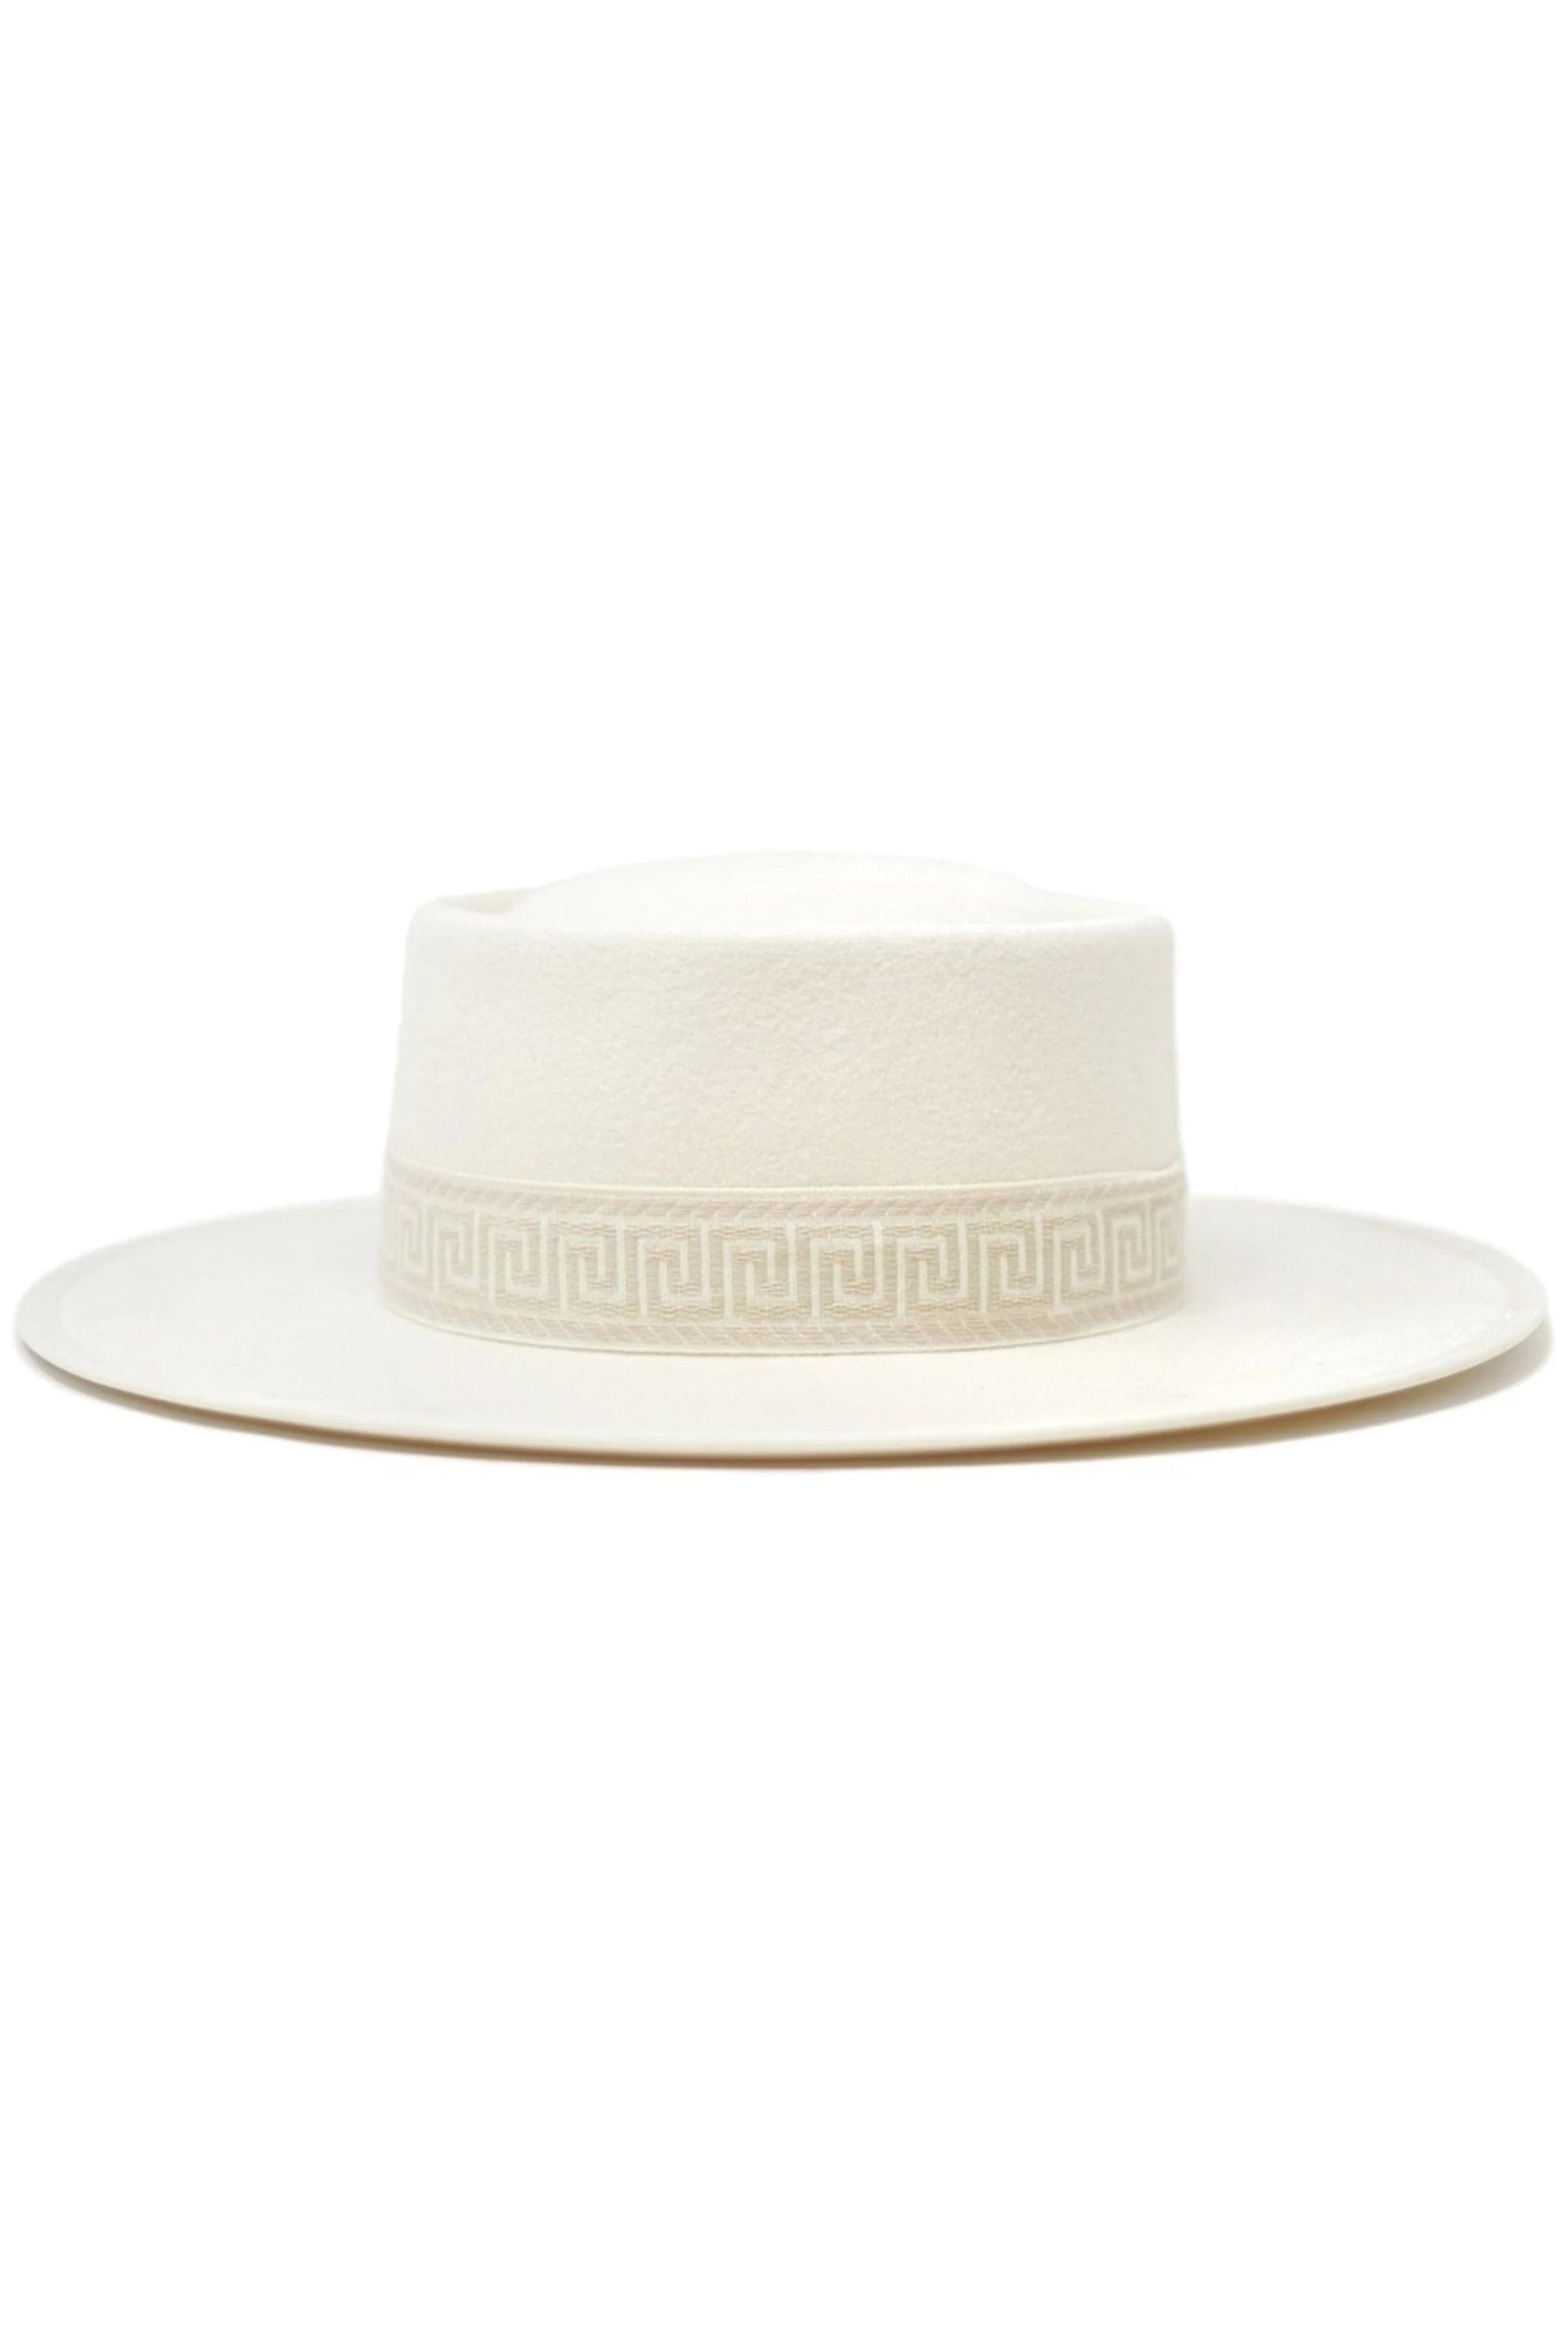 CLEO Boater Hat by Olive & Pique - Hats - Blooming Daily